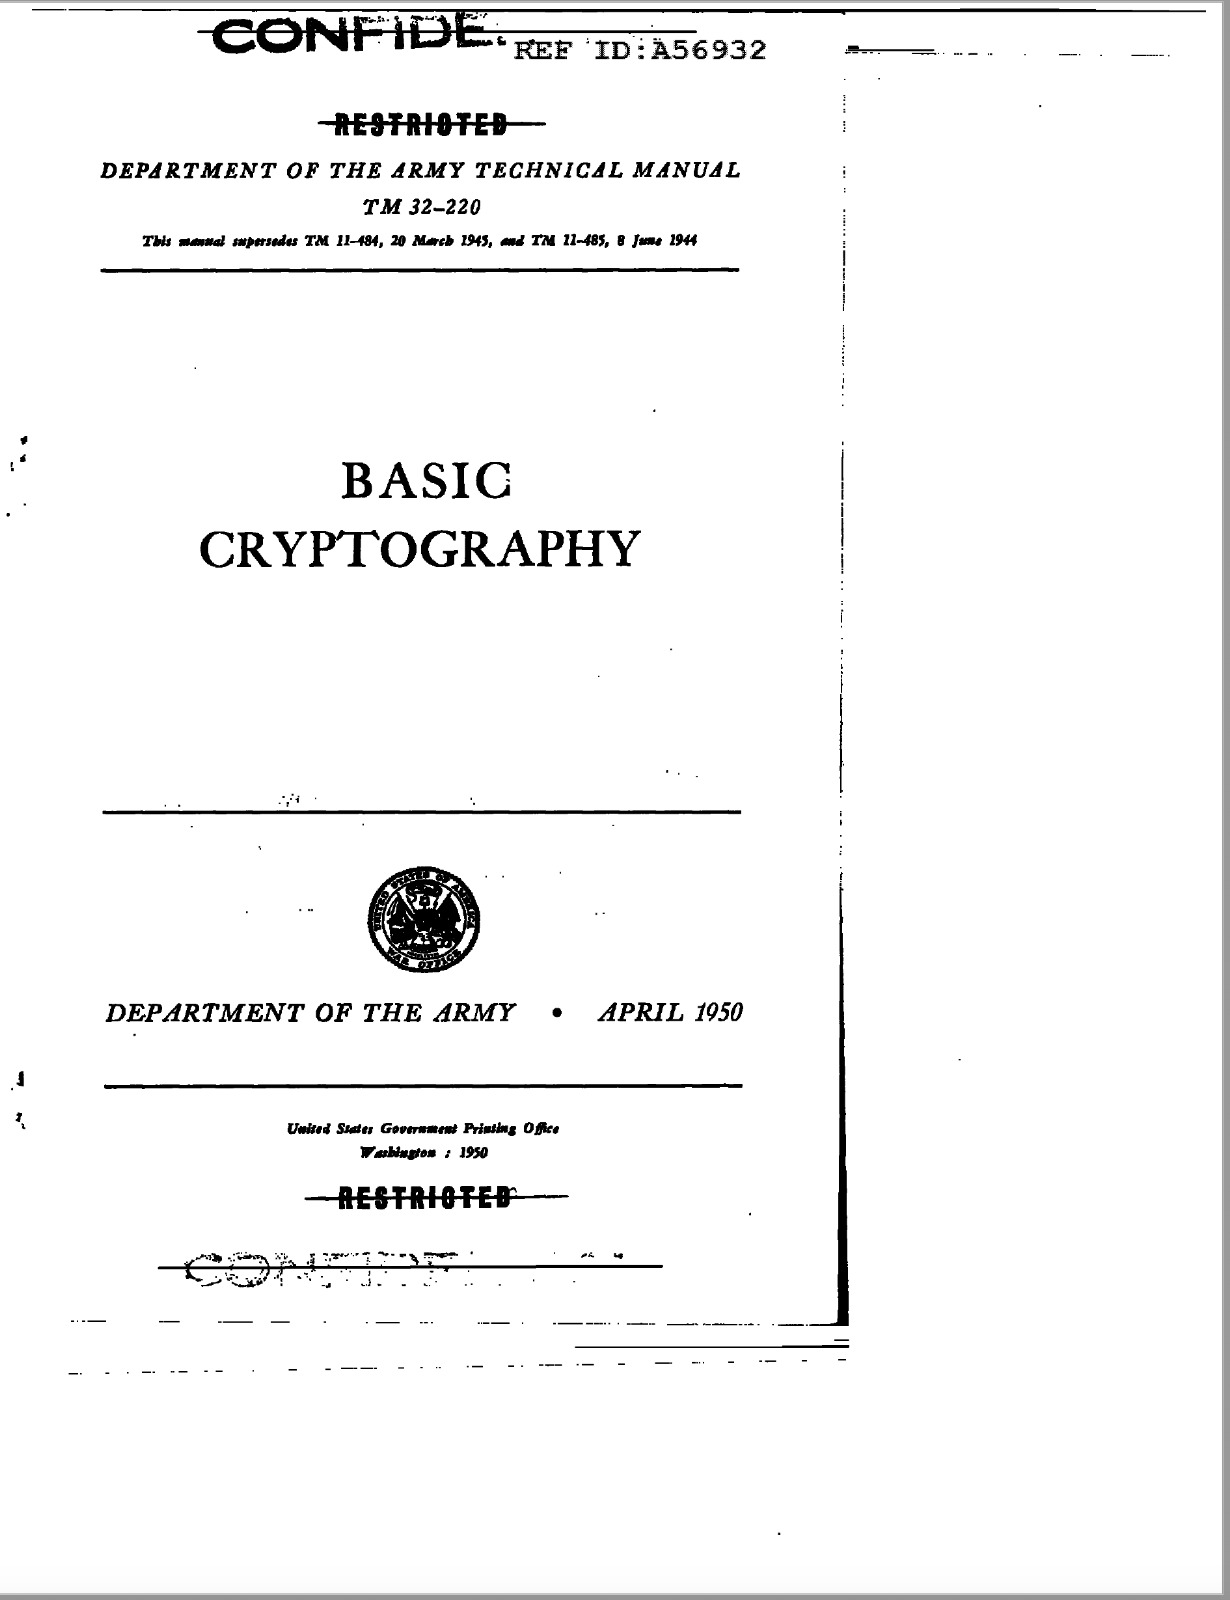 192 Page 1950 Declassified BASIC CRYPTOGRAPHY TM 32-220 Technical Manual on CD